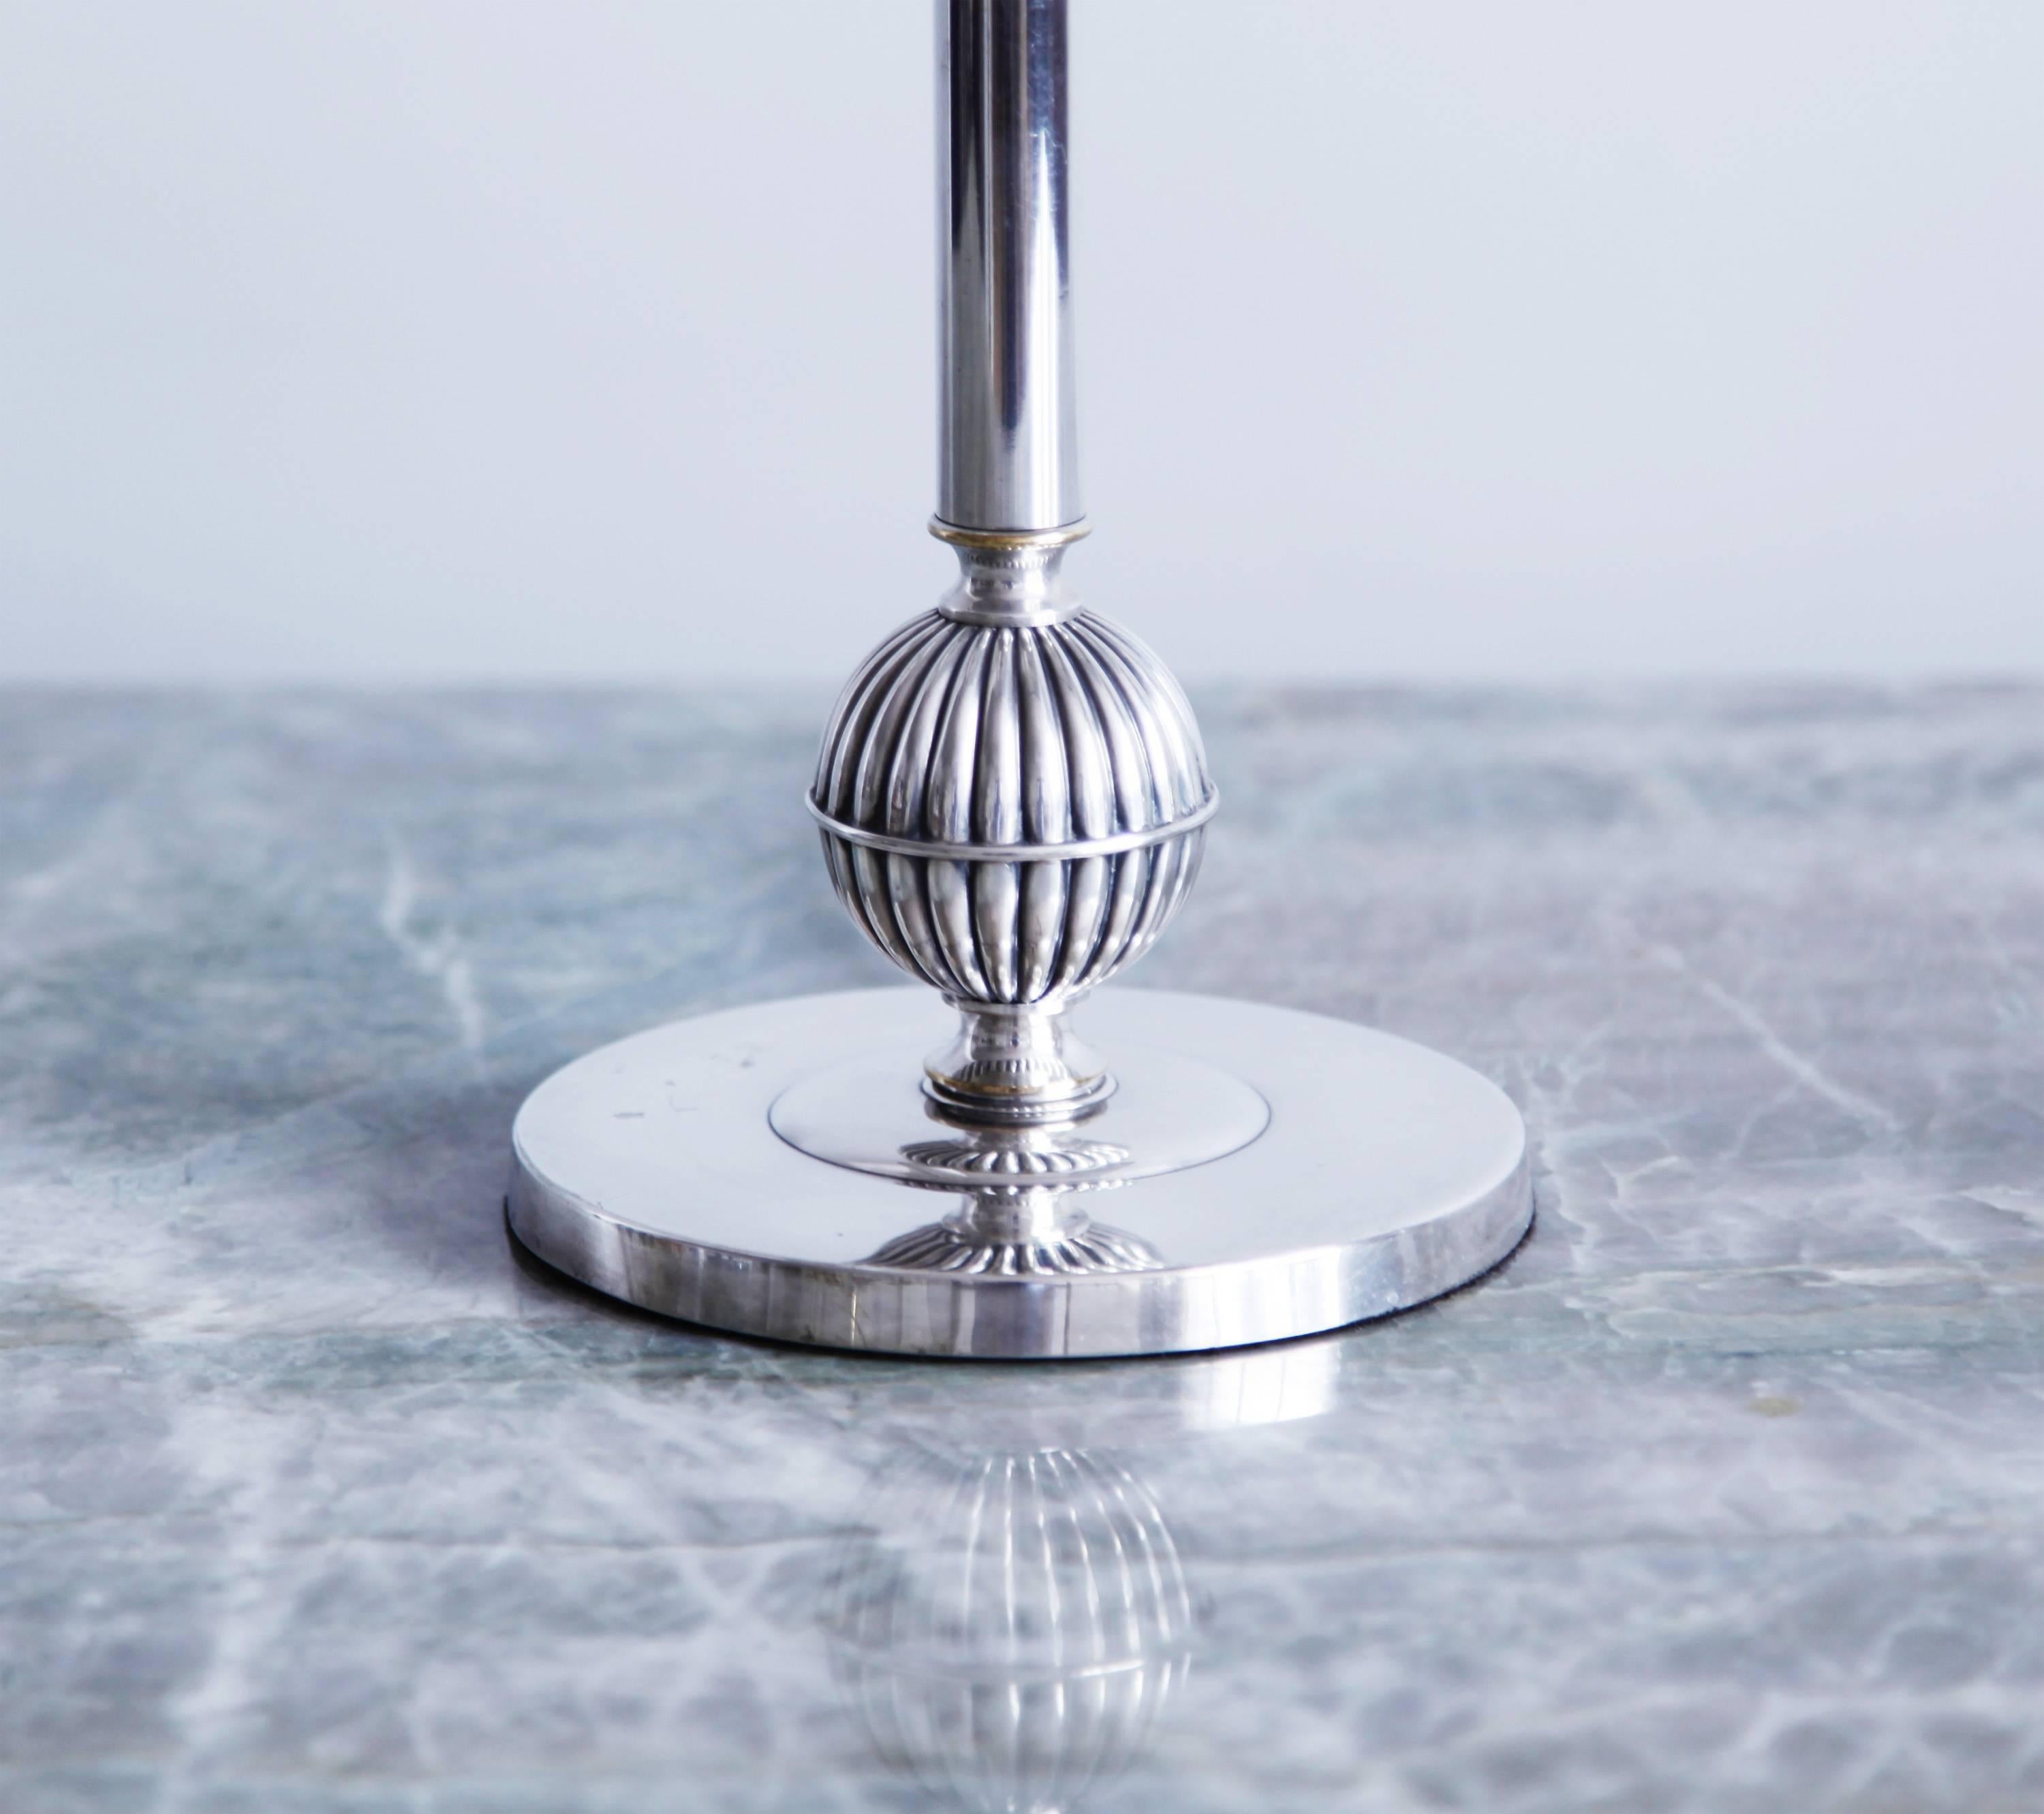 This Swedish Art Deco lamp was fabricated by the renowned silversmiths C.G. Hallberg. We love the fluted sphere of the base, and the excellent proportions. 

Rewired for use in the U.S.